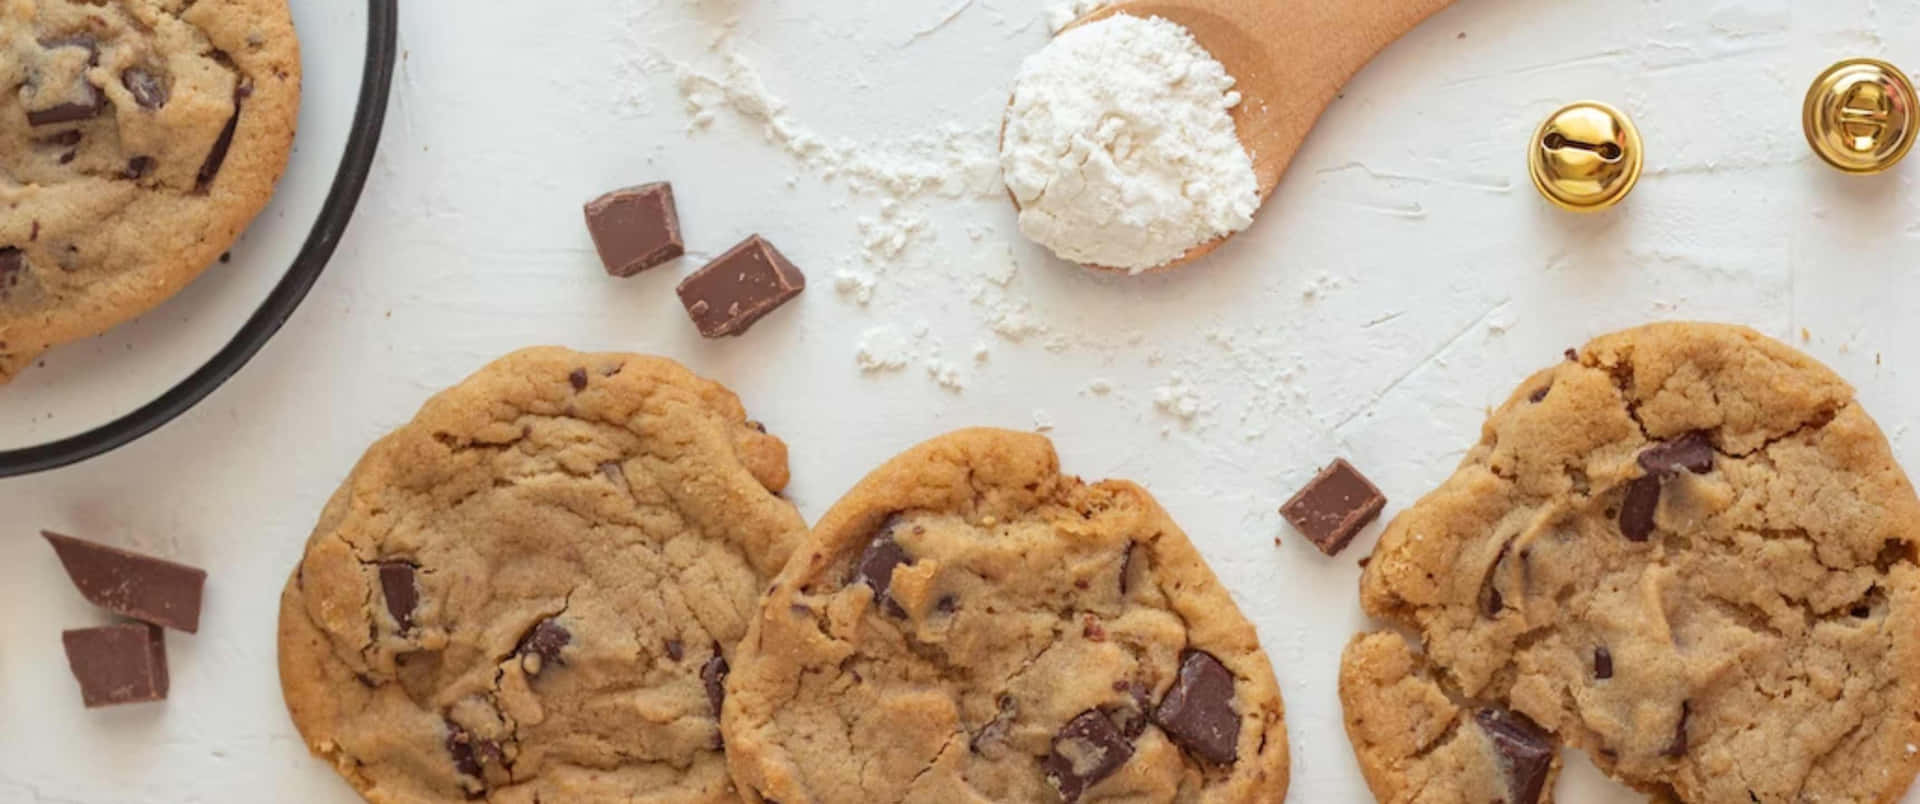 Sweet Flat-lay Photography 3440x1440p Cookies Background For Desktop